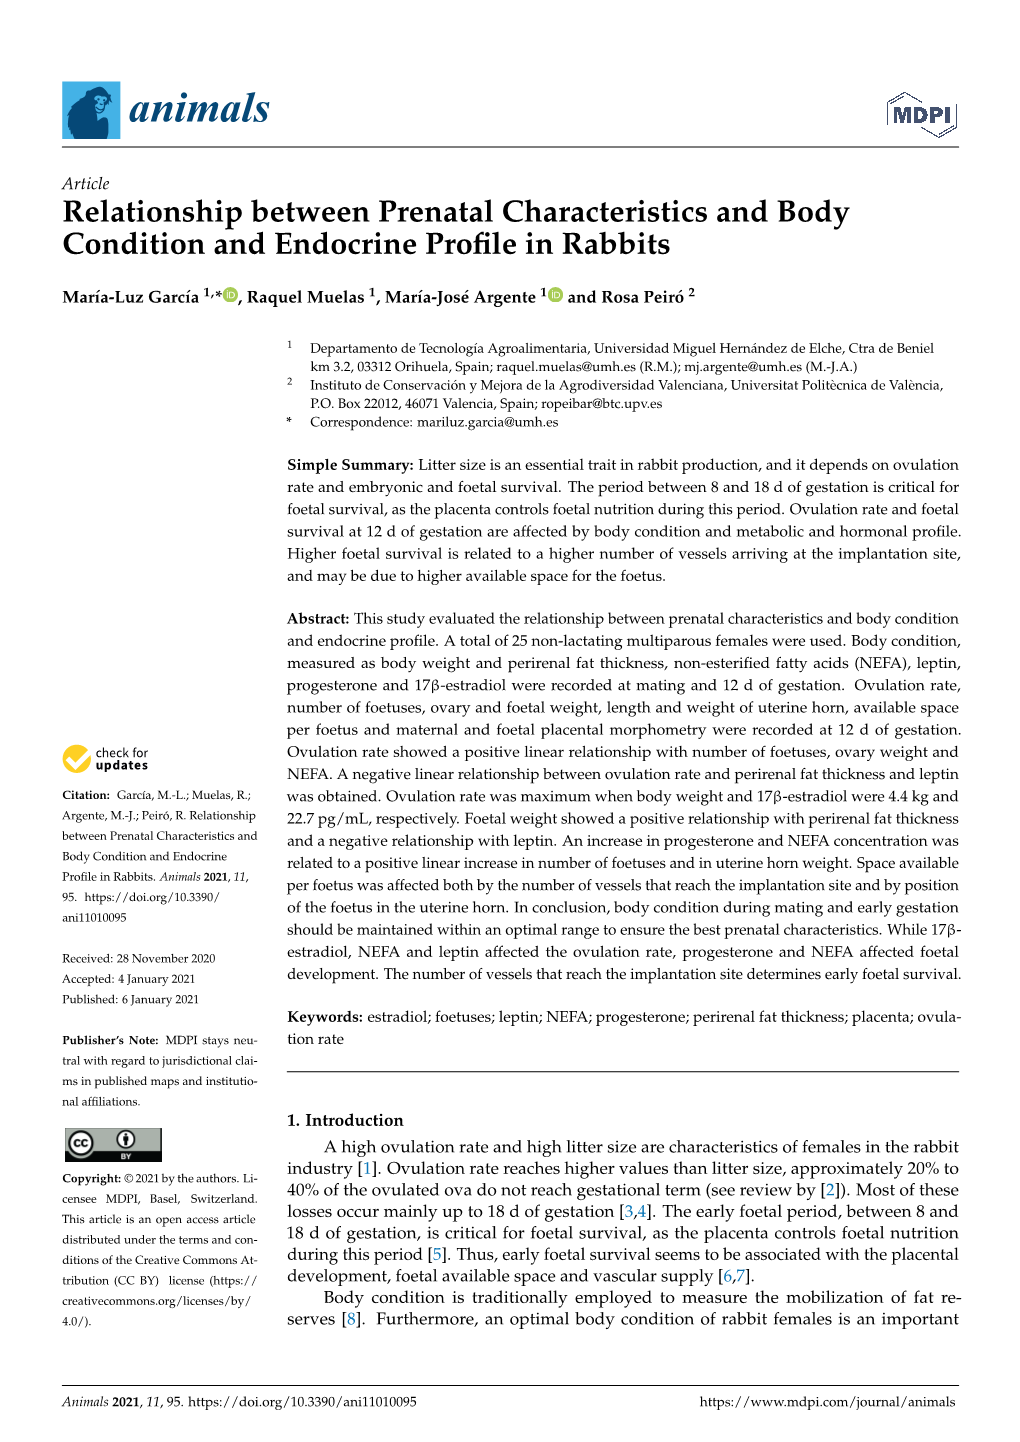 Relationship Between Prenatal Characteristics and Body Condition and Endocrine Profile in Rabbits